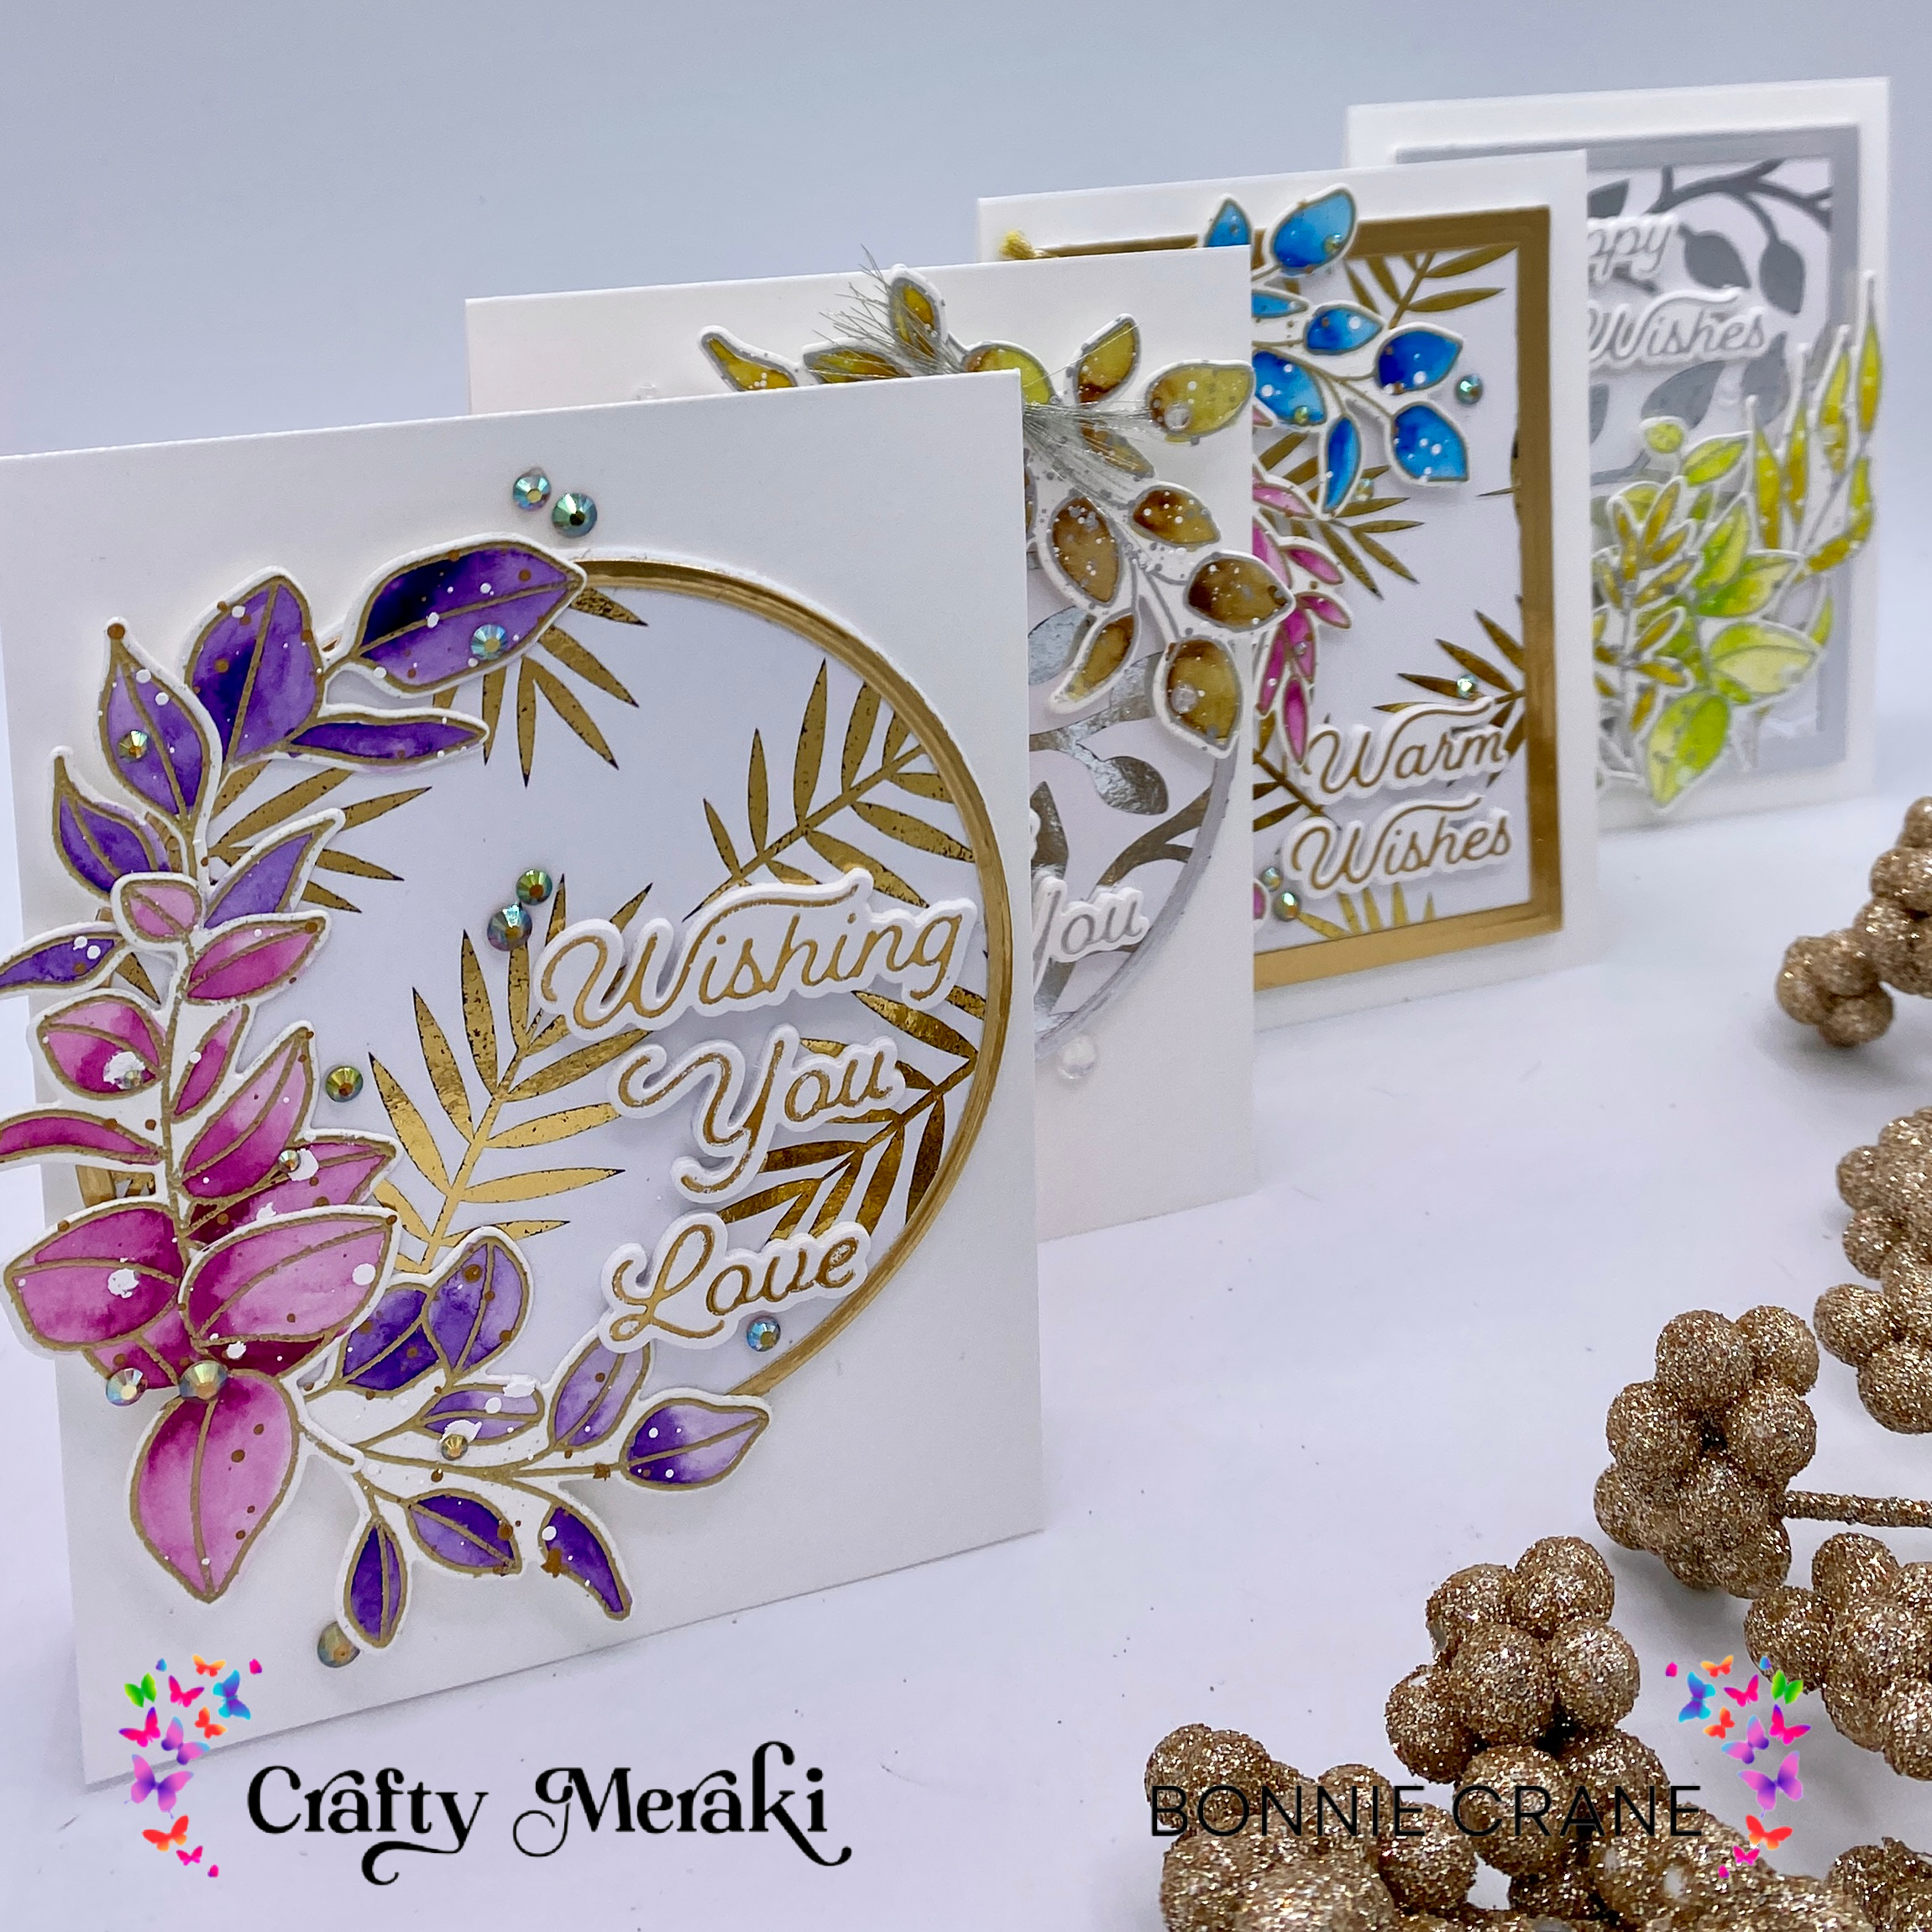 A Little bit of Everything … Water Colour, Hot Foiling, Transfer Foiling & Embossing!